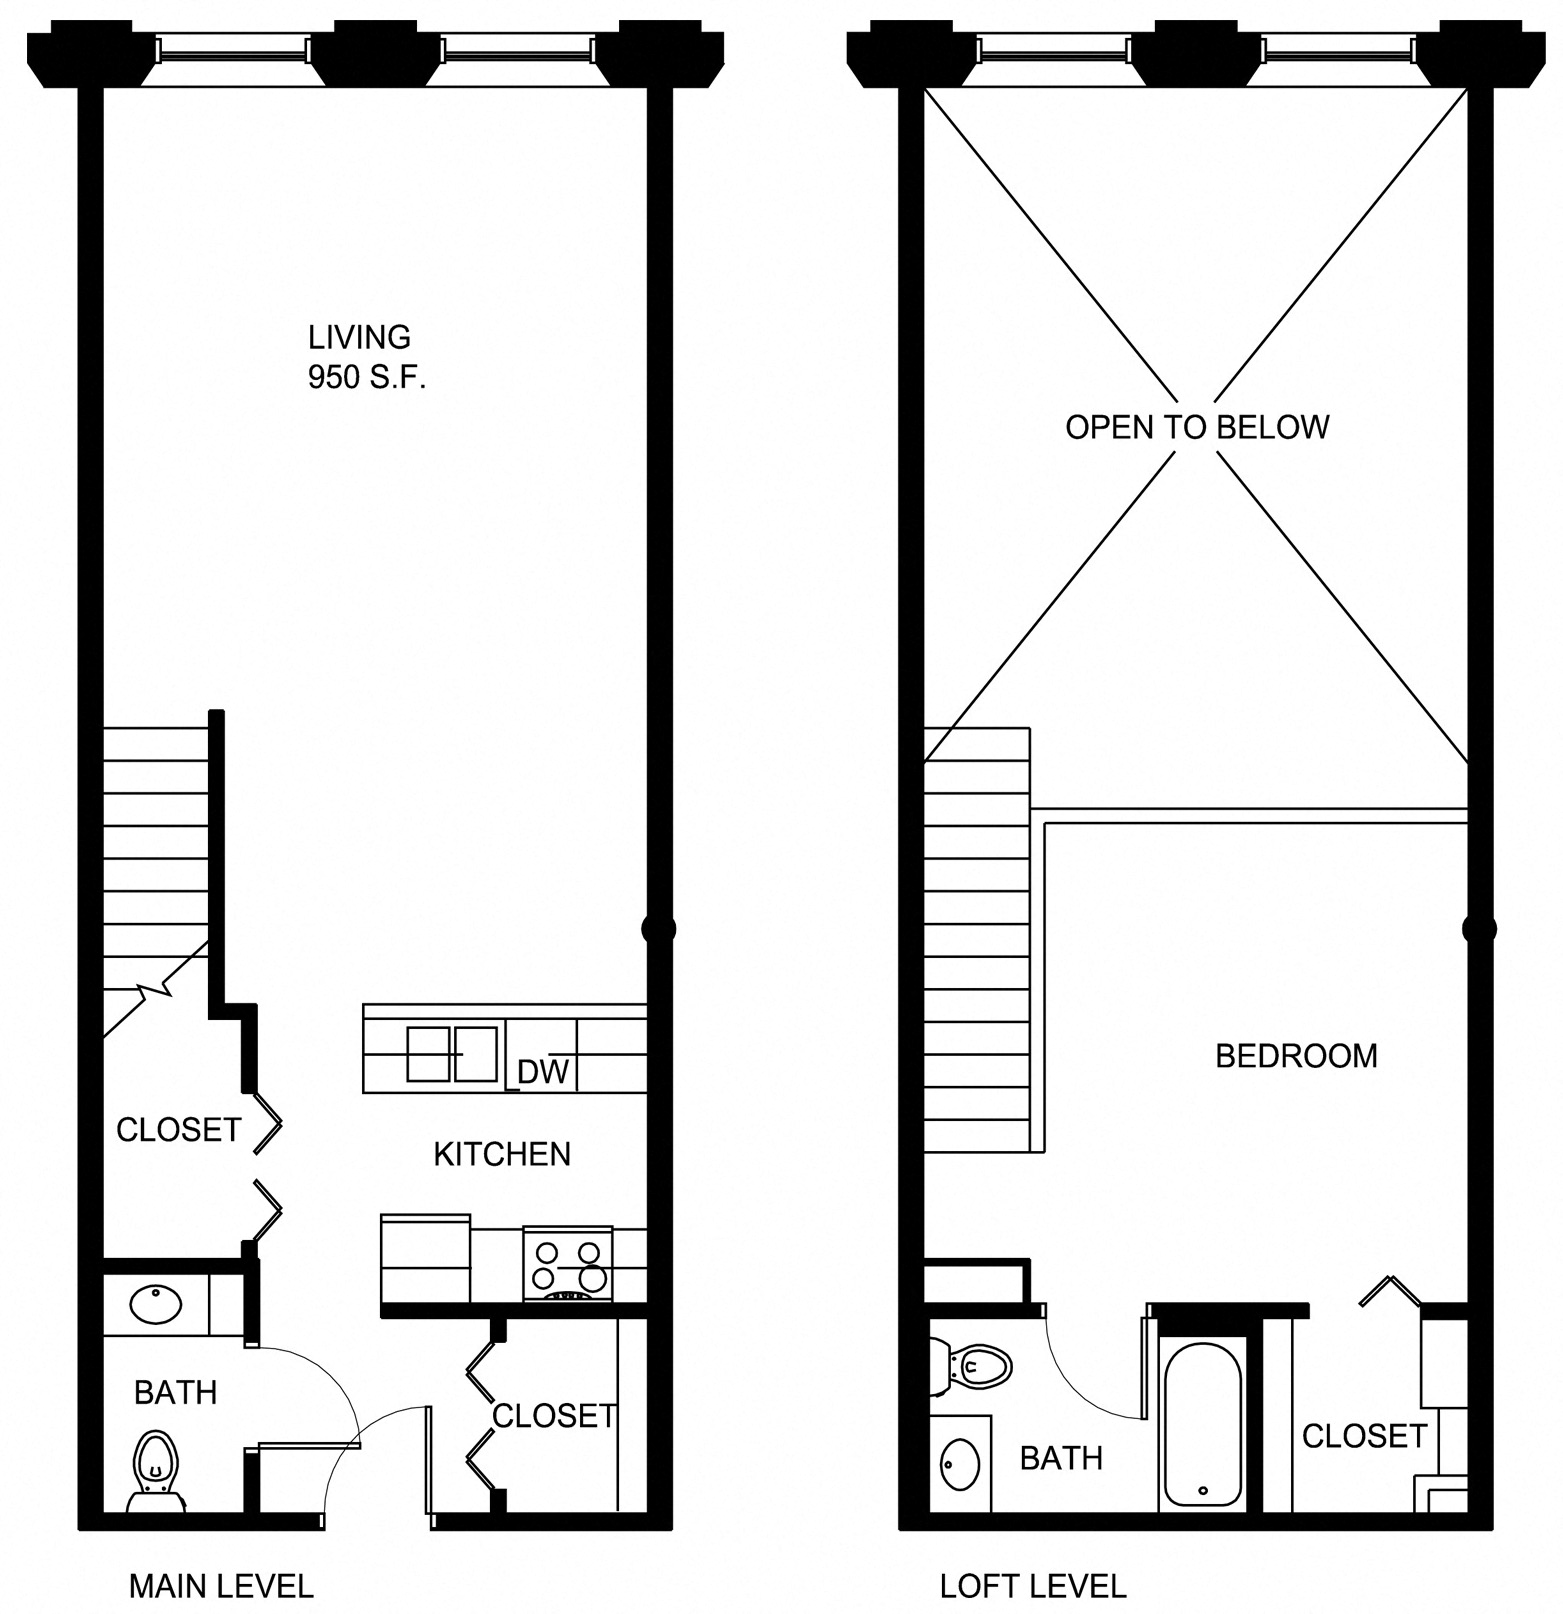 Floorplan for Apartment #P162, 1 bedroom unit at Halstead Providence